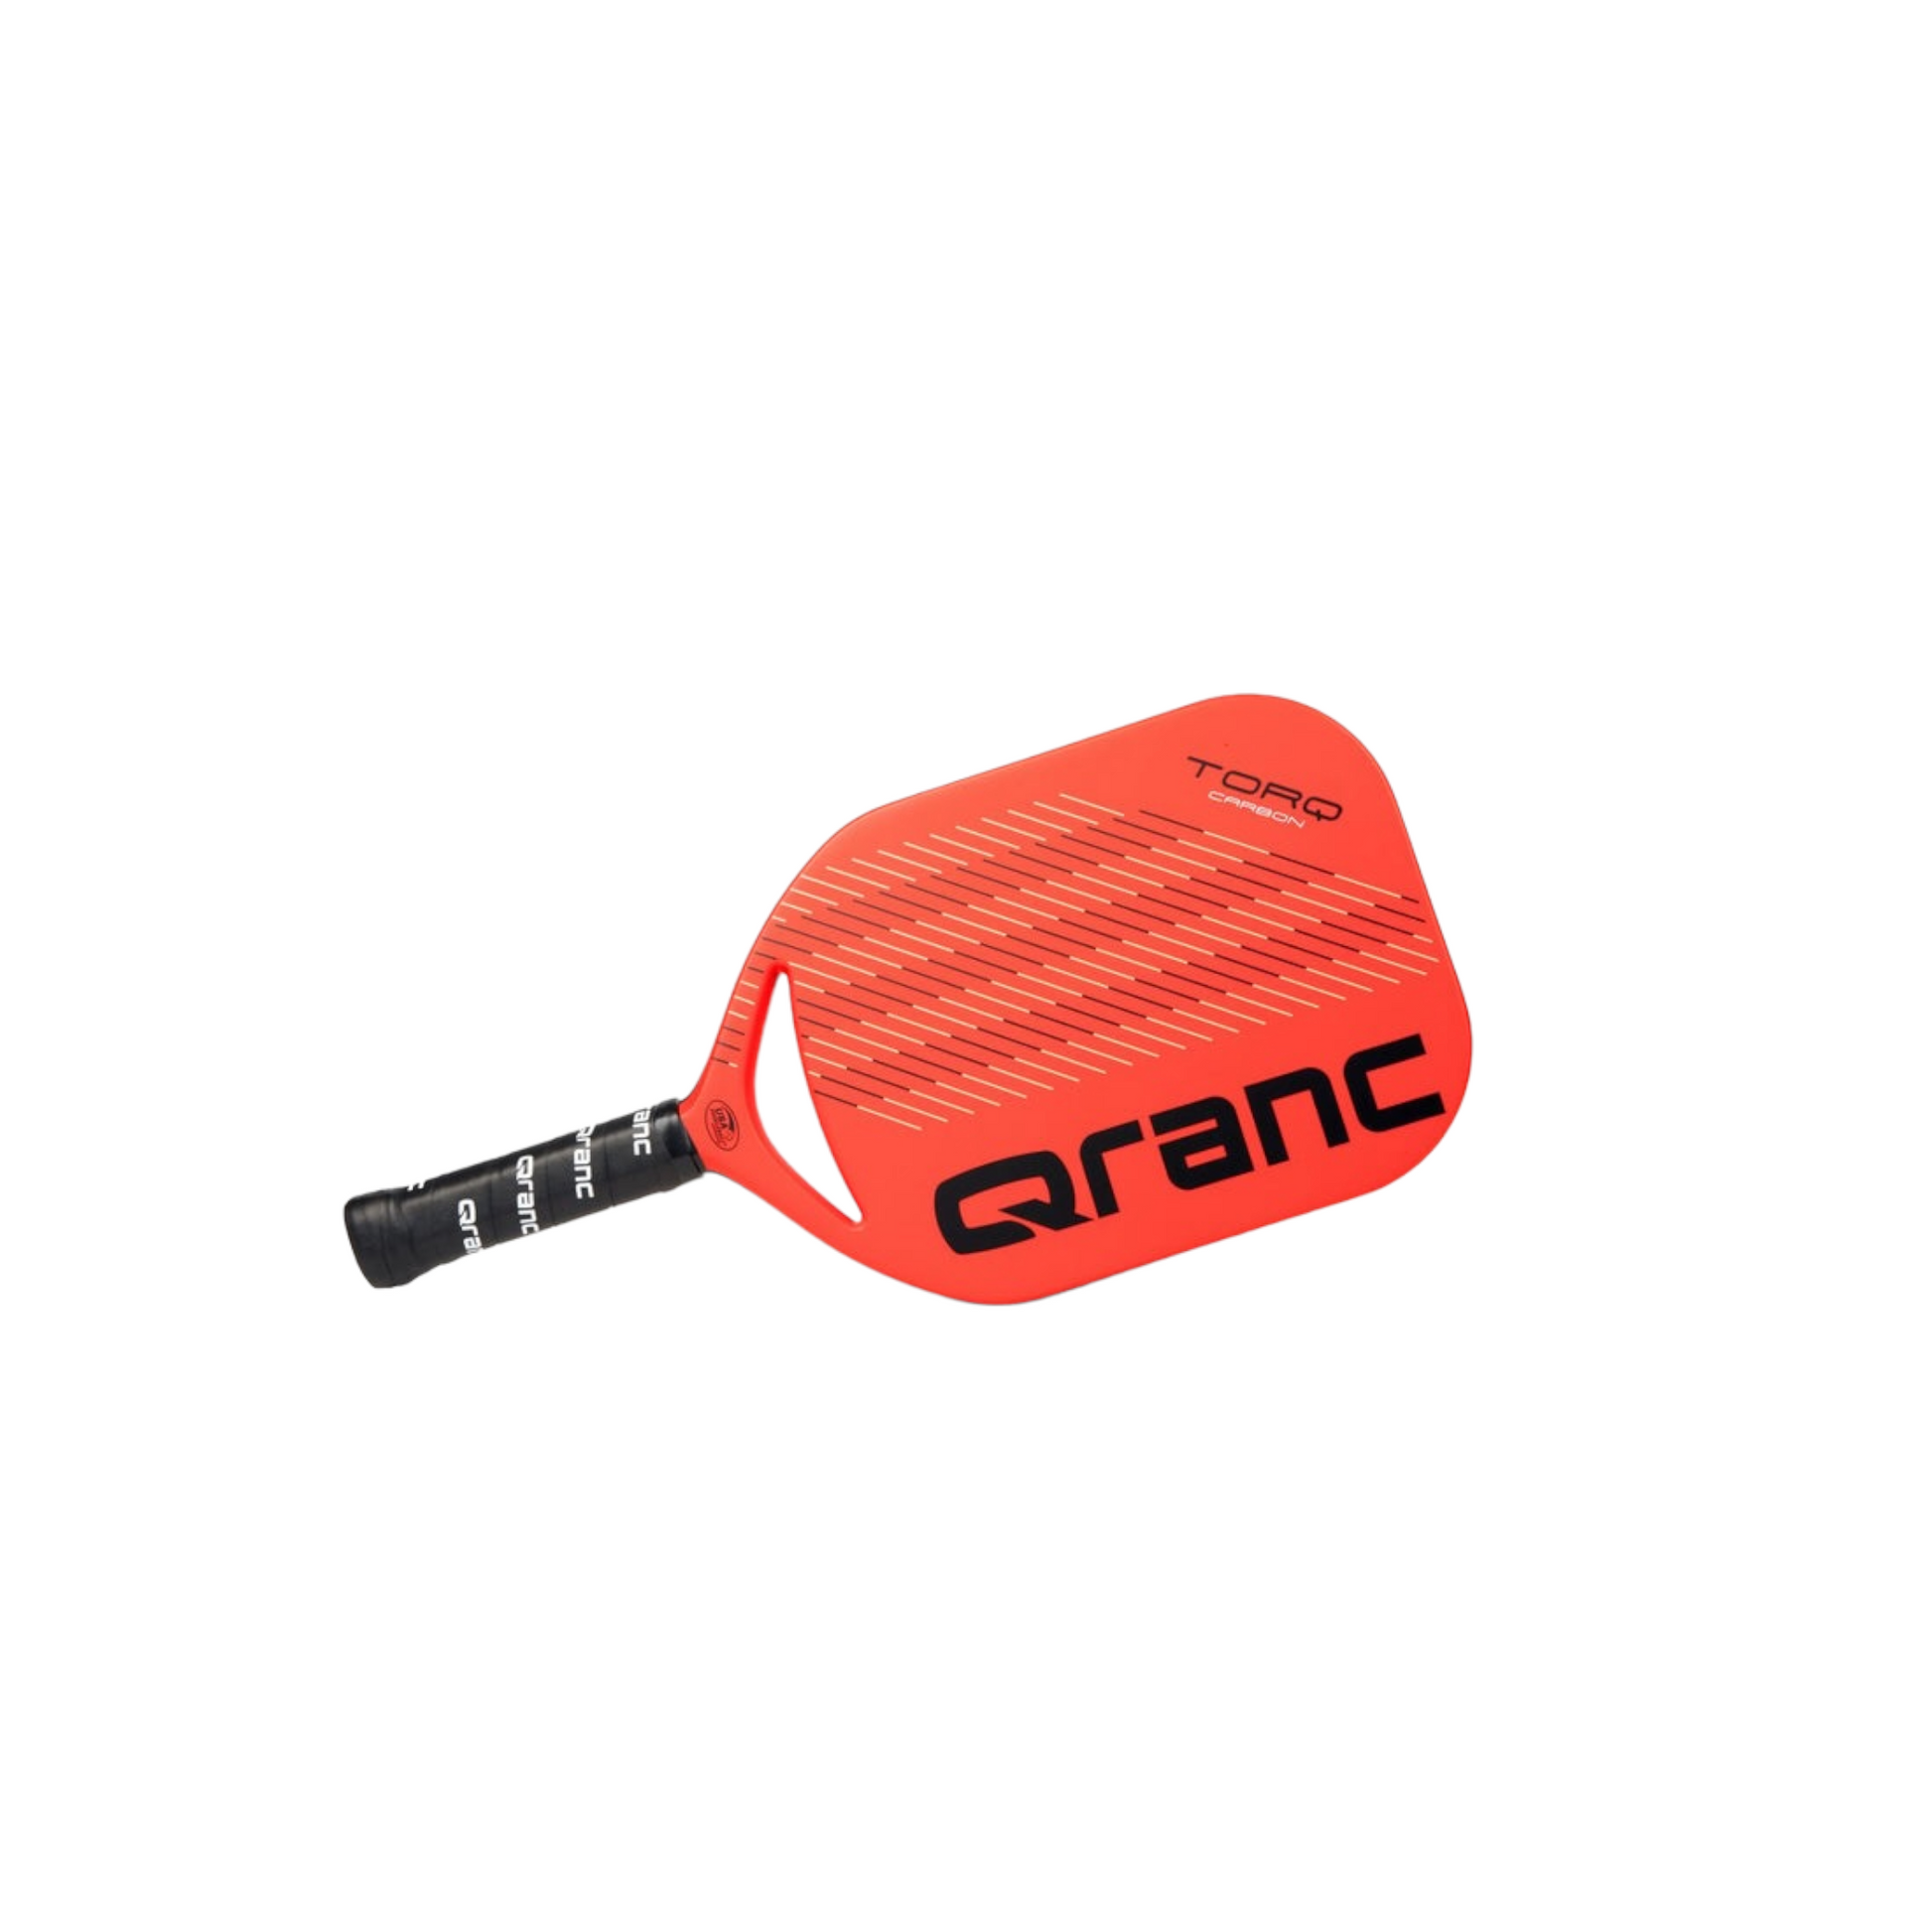 Qranc's High Tech TorQ Pickleball Paddle | Designed to Elevate Your Game, No Matter Your Skill Level